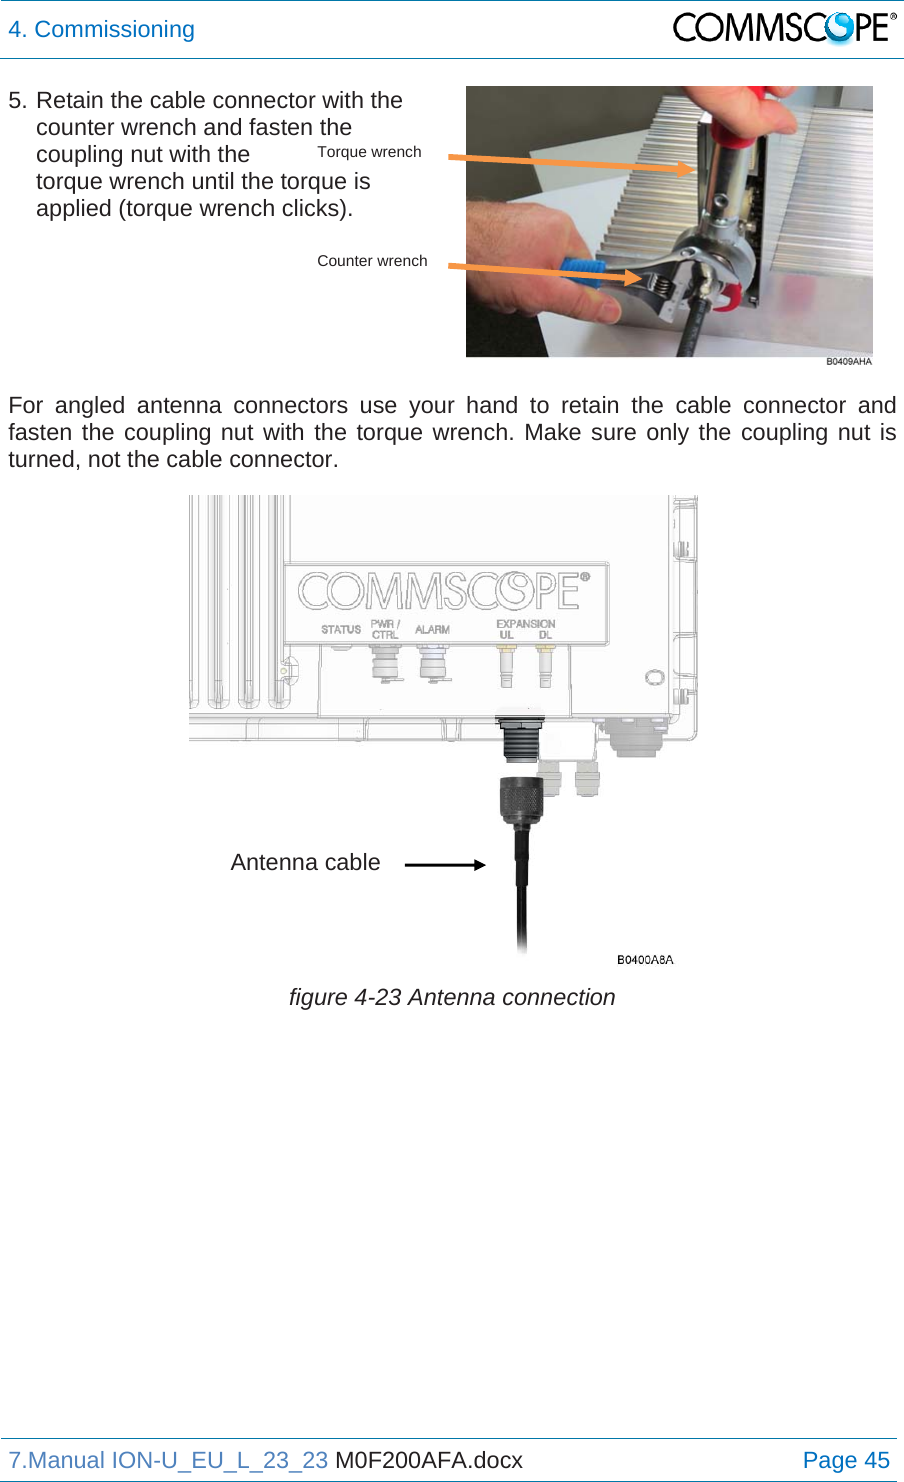 4. Commissioning  7.Manual ION-U_EU_L_23_23 M0F200AFA.docx Page 45 5. Retain the cable connector with the counter wrench and fasten the coupling nut with the  torque wrench until the torque is applied (torque wrench clicks).   For angled antenna connectors use your hand to retain the cable connector and fasten the coupling nut with the torque wrench. Make sure only the coupling nut is turned, not the cable connector.  figure 4-23 Antenna connection   Antenna cable Torque wrenchCounter wrench 